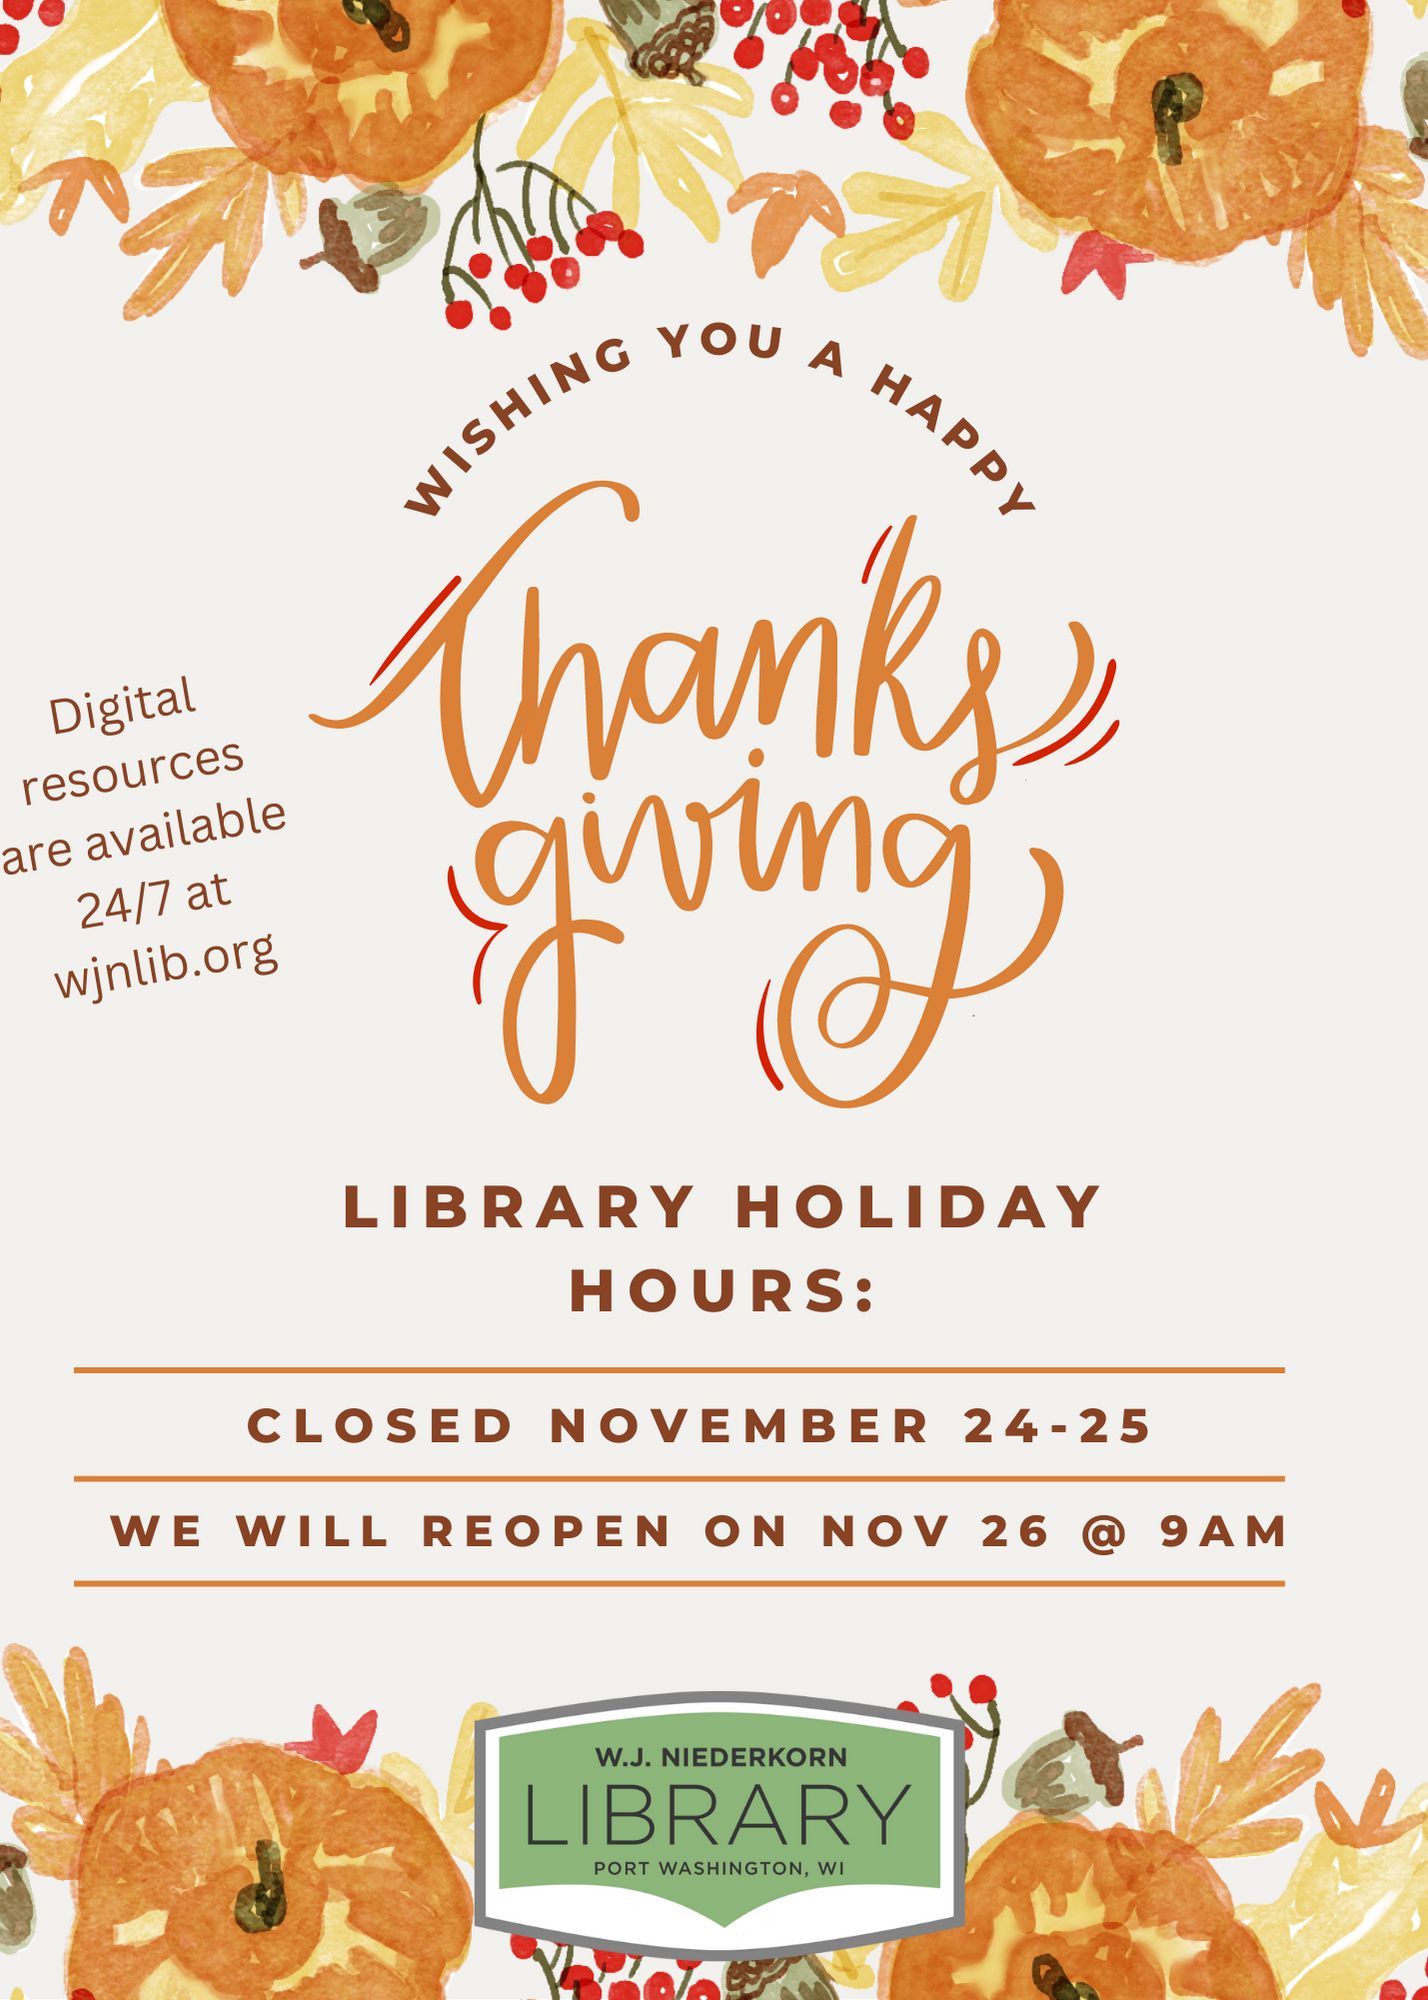 Thanksgiving holiday hours for the library. Closed Nov 24-25